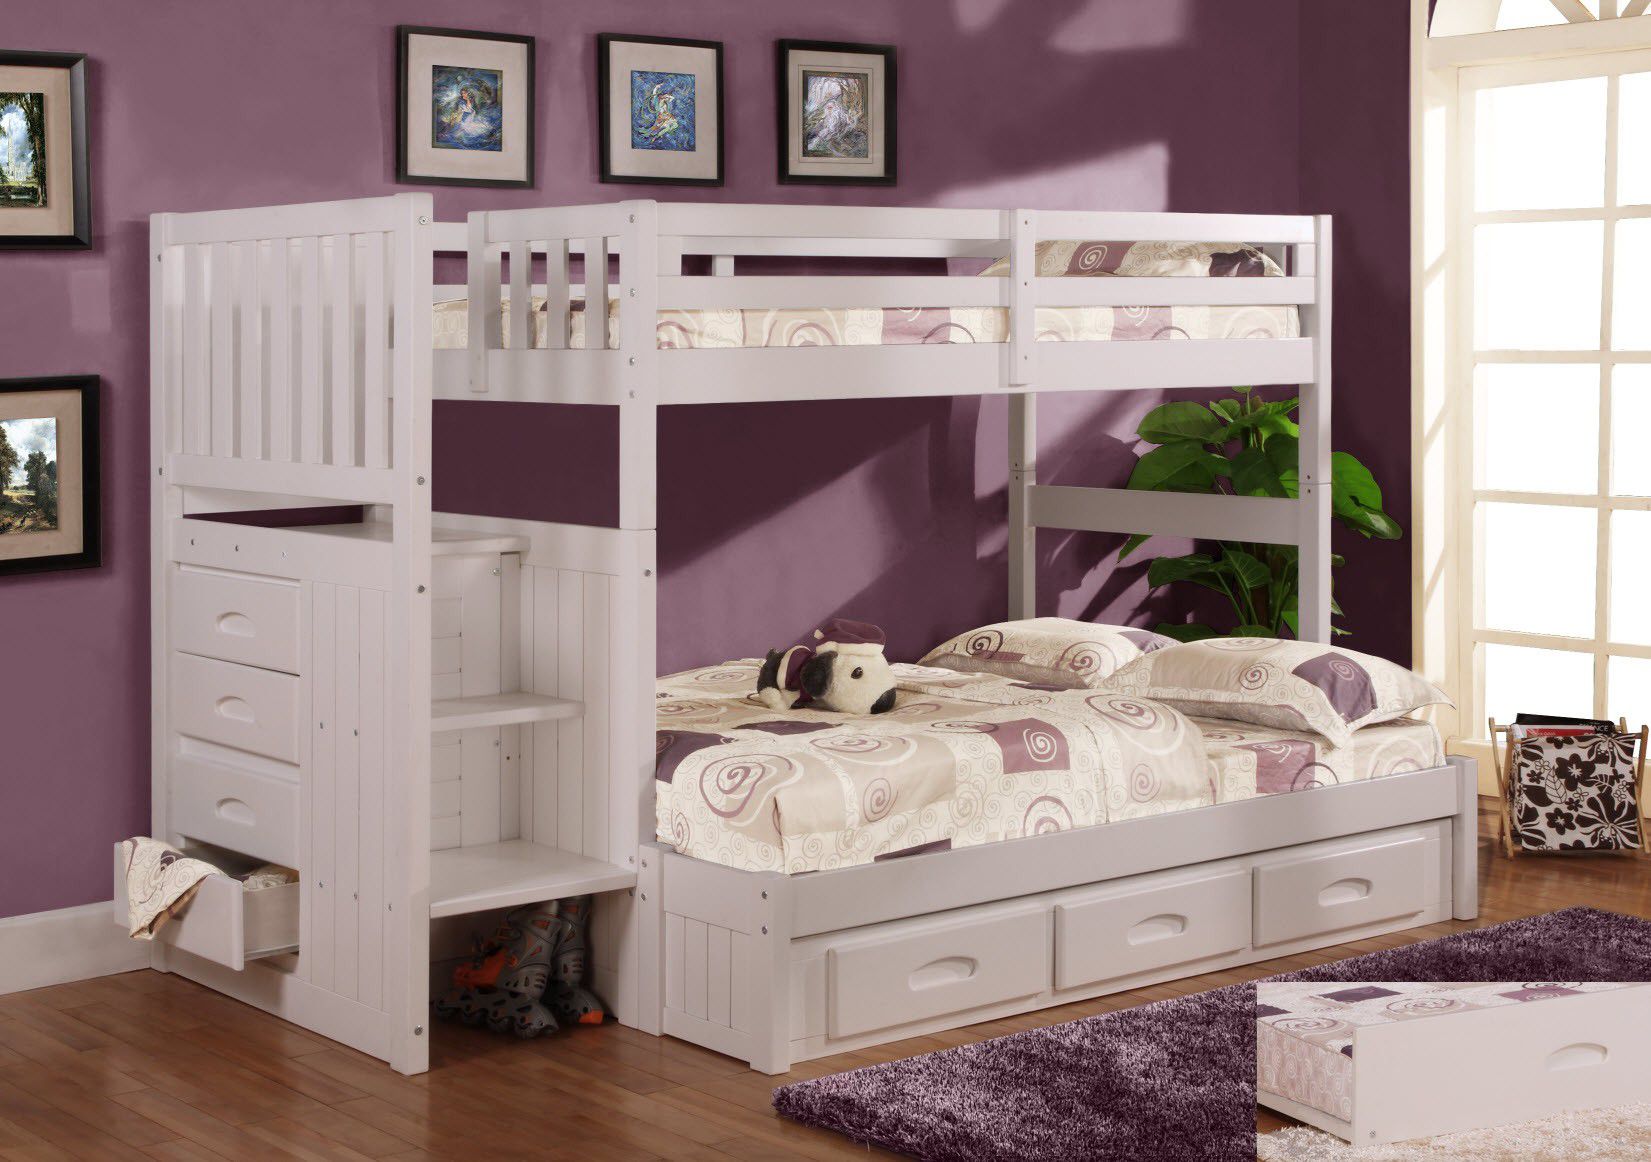 Twin over full bunk bed. $53 DOWN PAYMENT